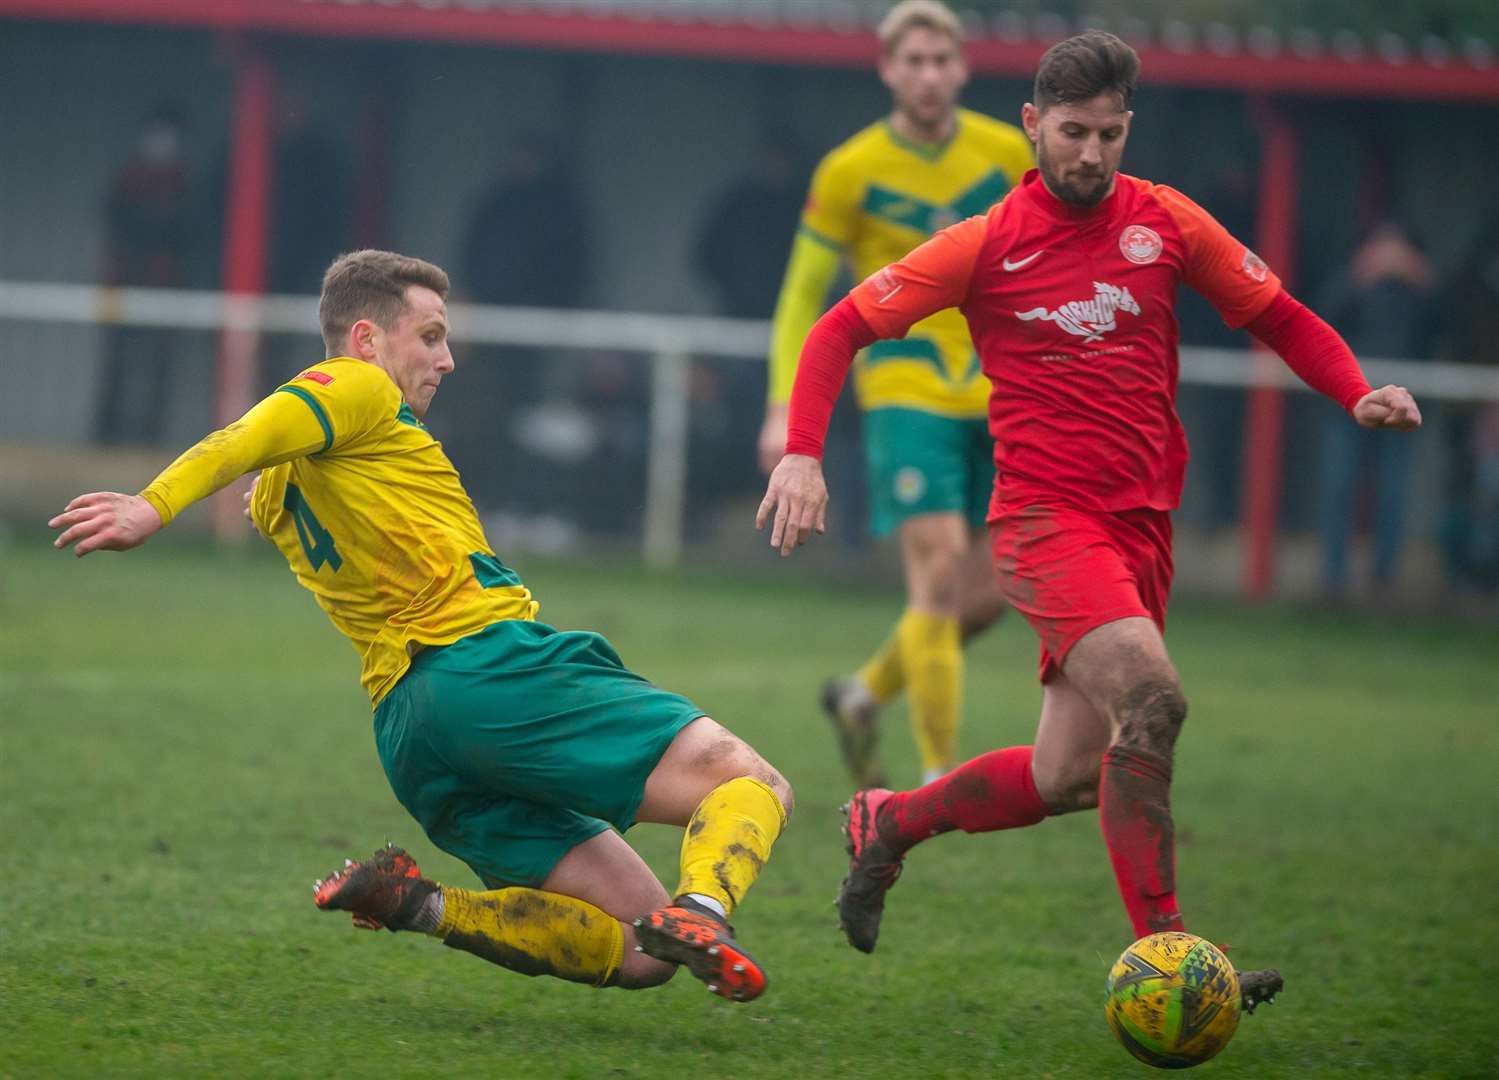 Josh Wisson challenges Hythe player-boss James Rogers Picture: Ashford United